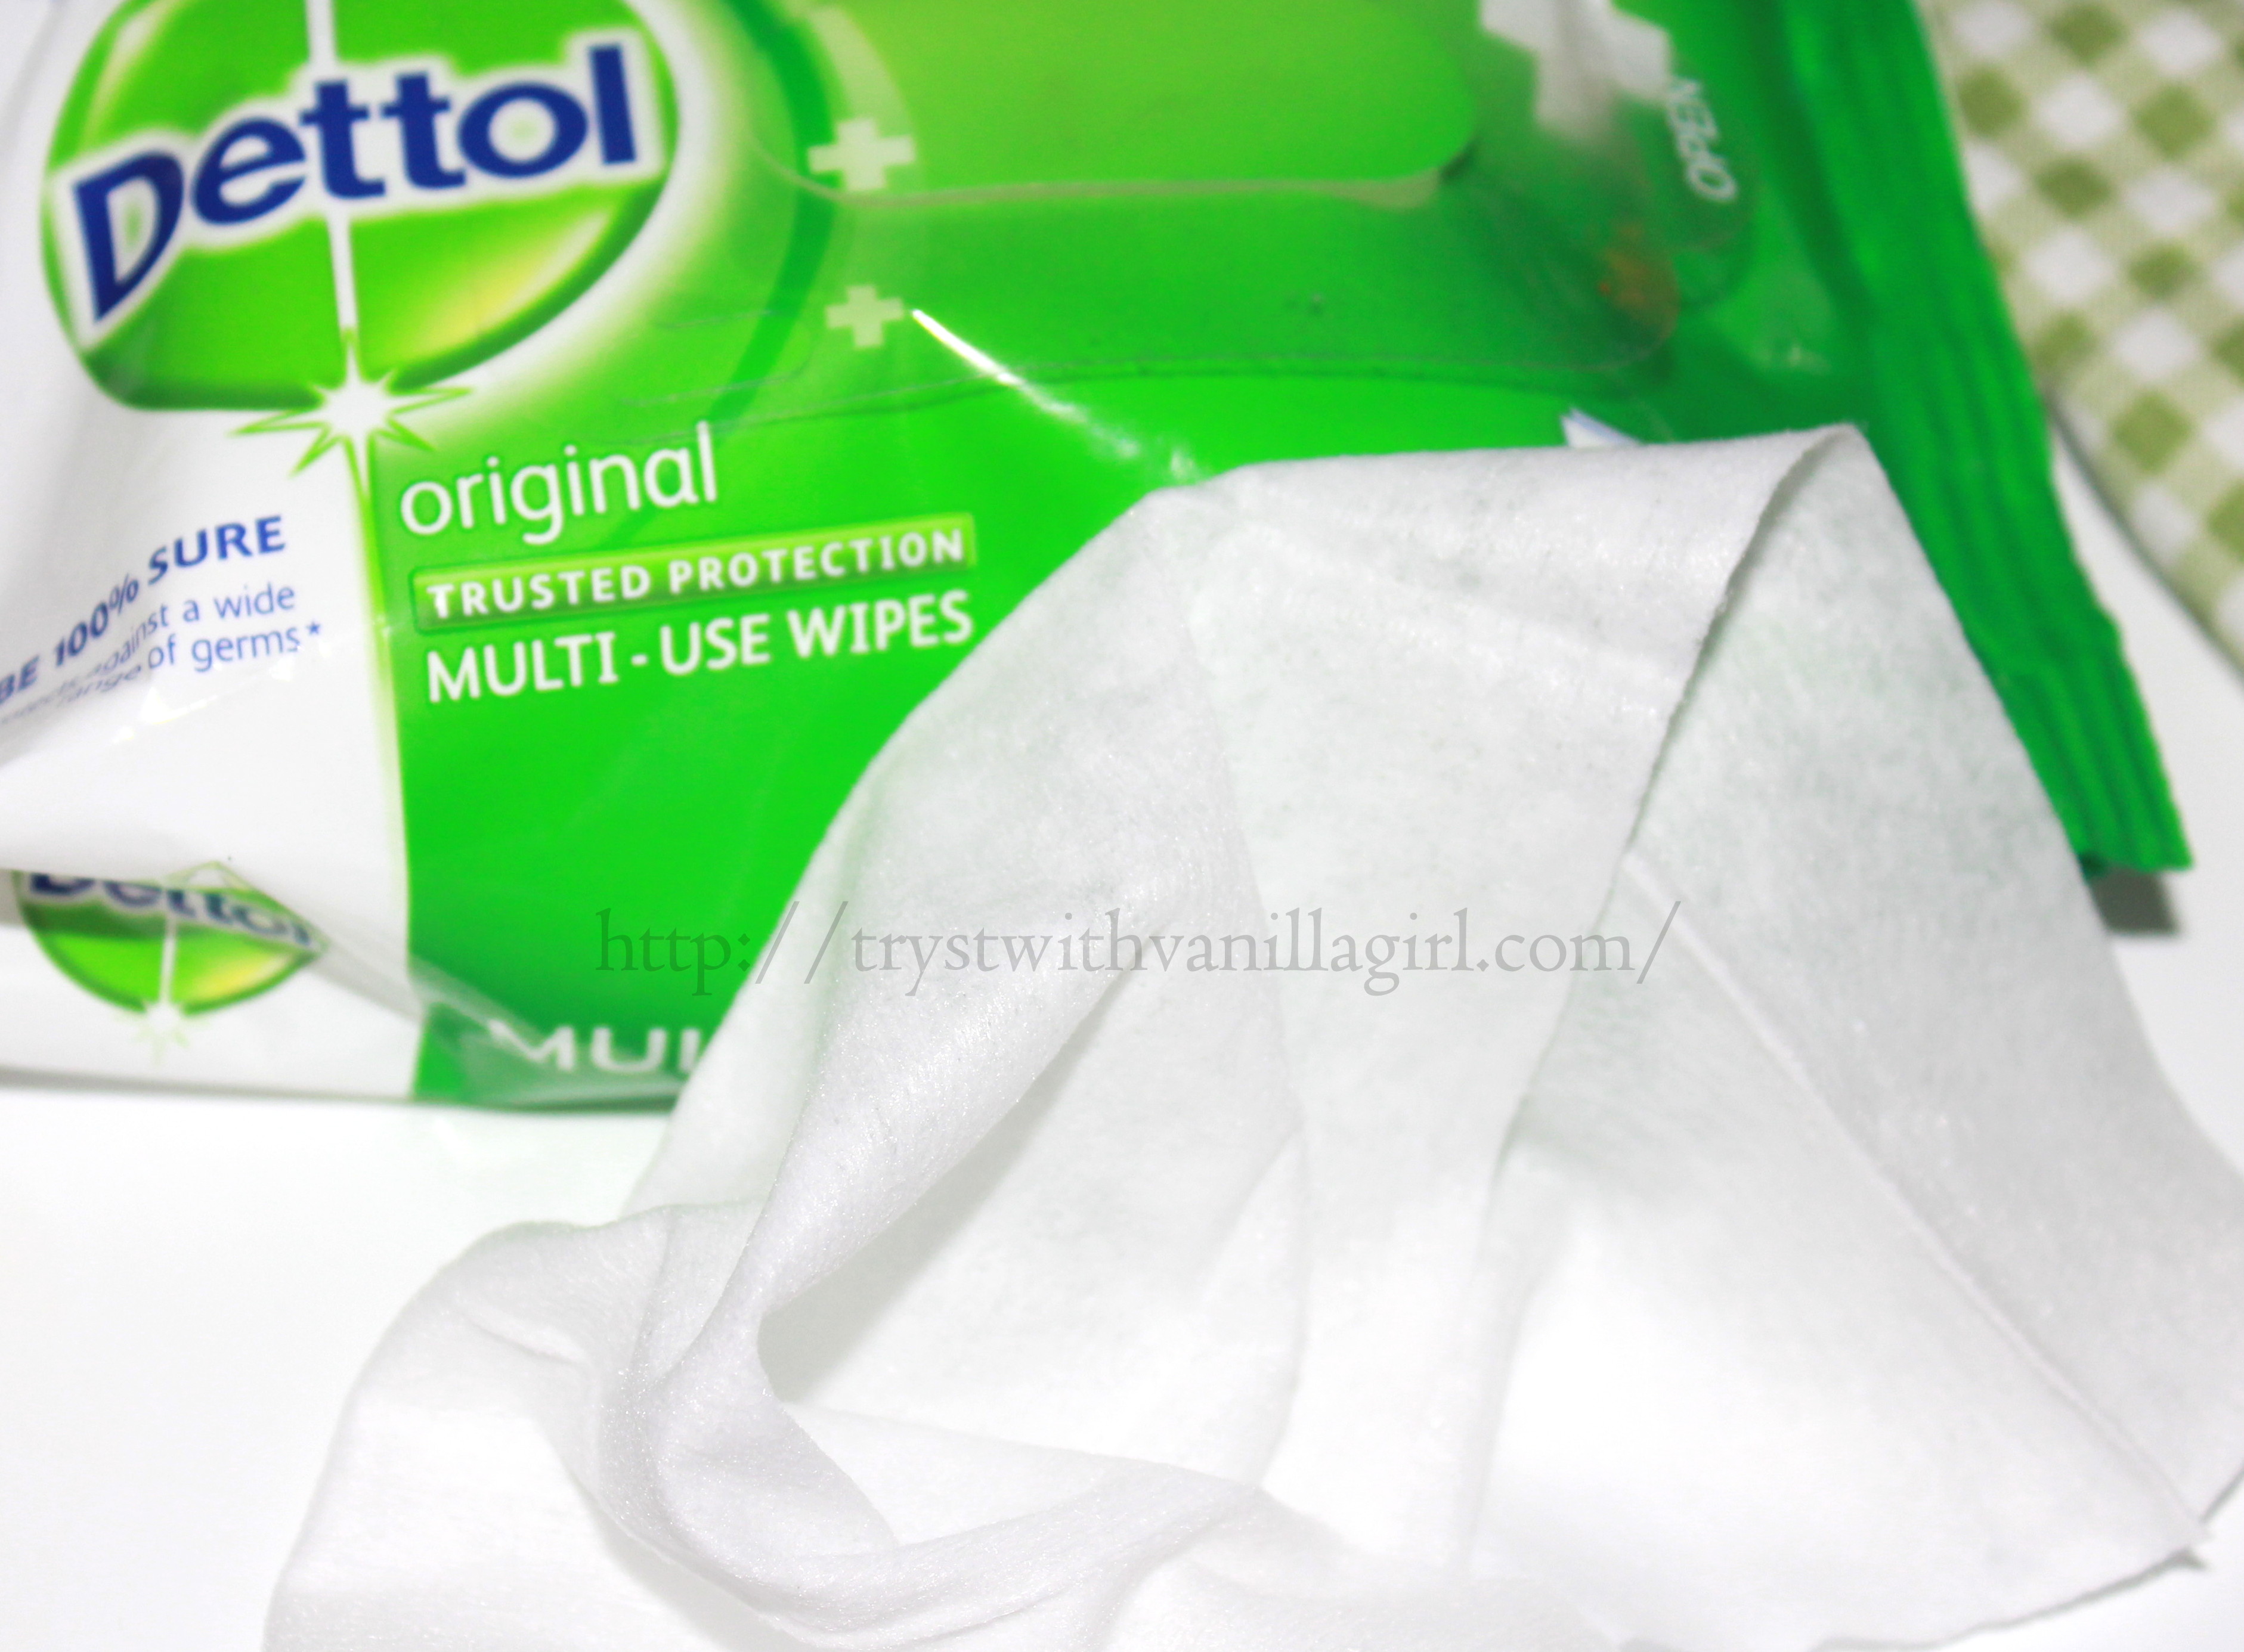 Dettol Multi Use Wipes Review,Price in India